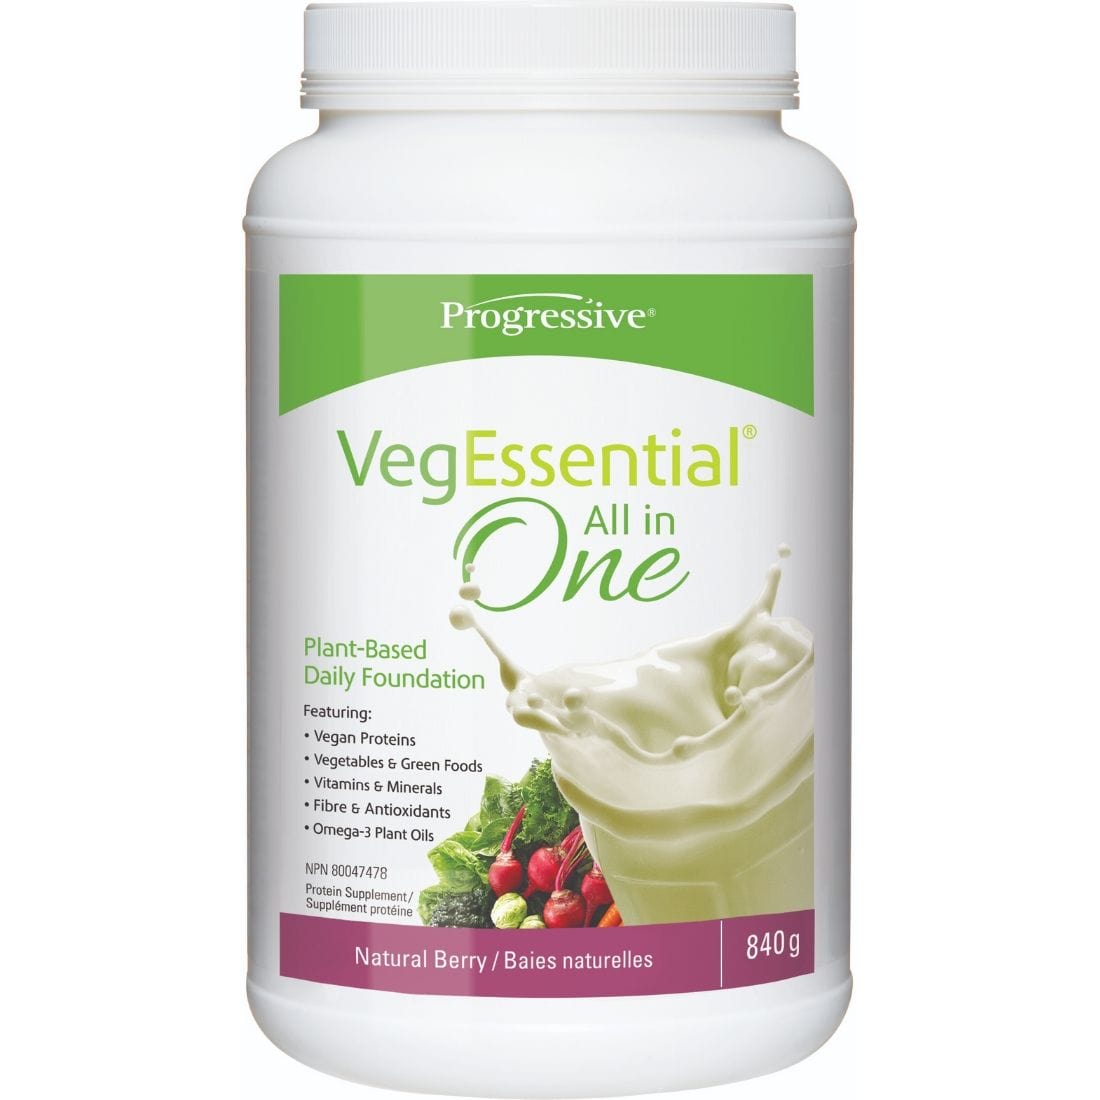 Progressive VegEssential All in One Protein Powder, Daily Nutrition in 1 Scoop